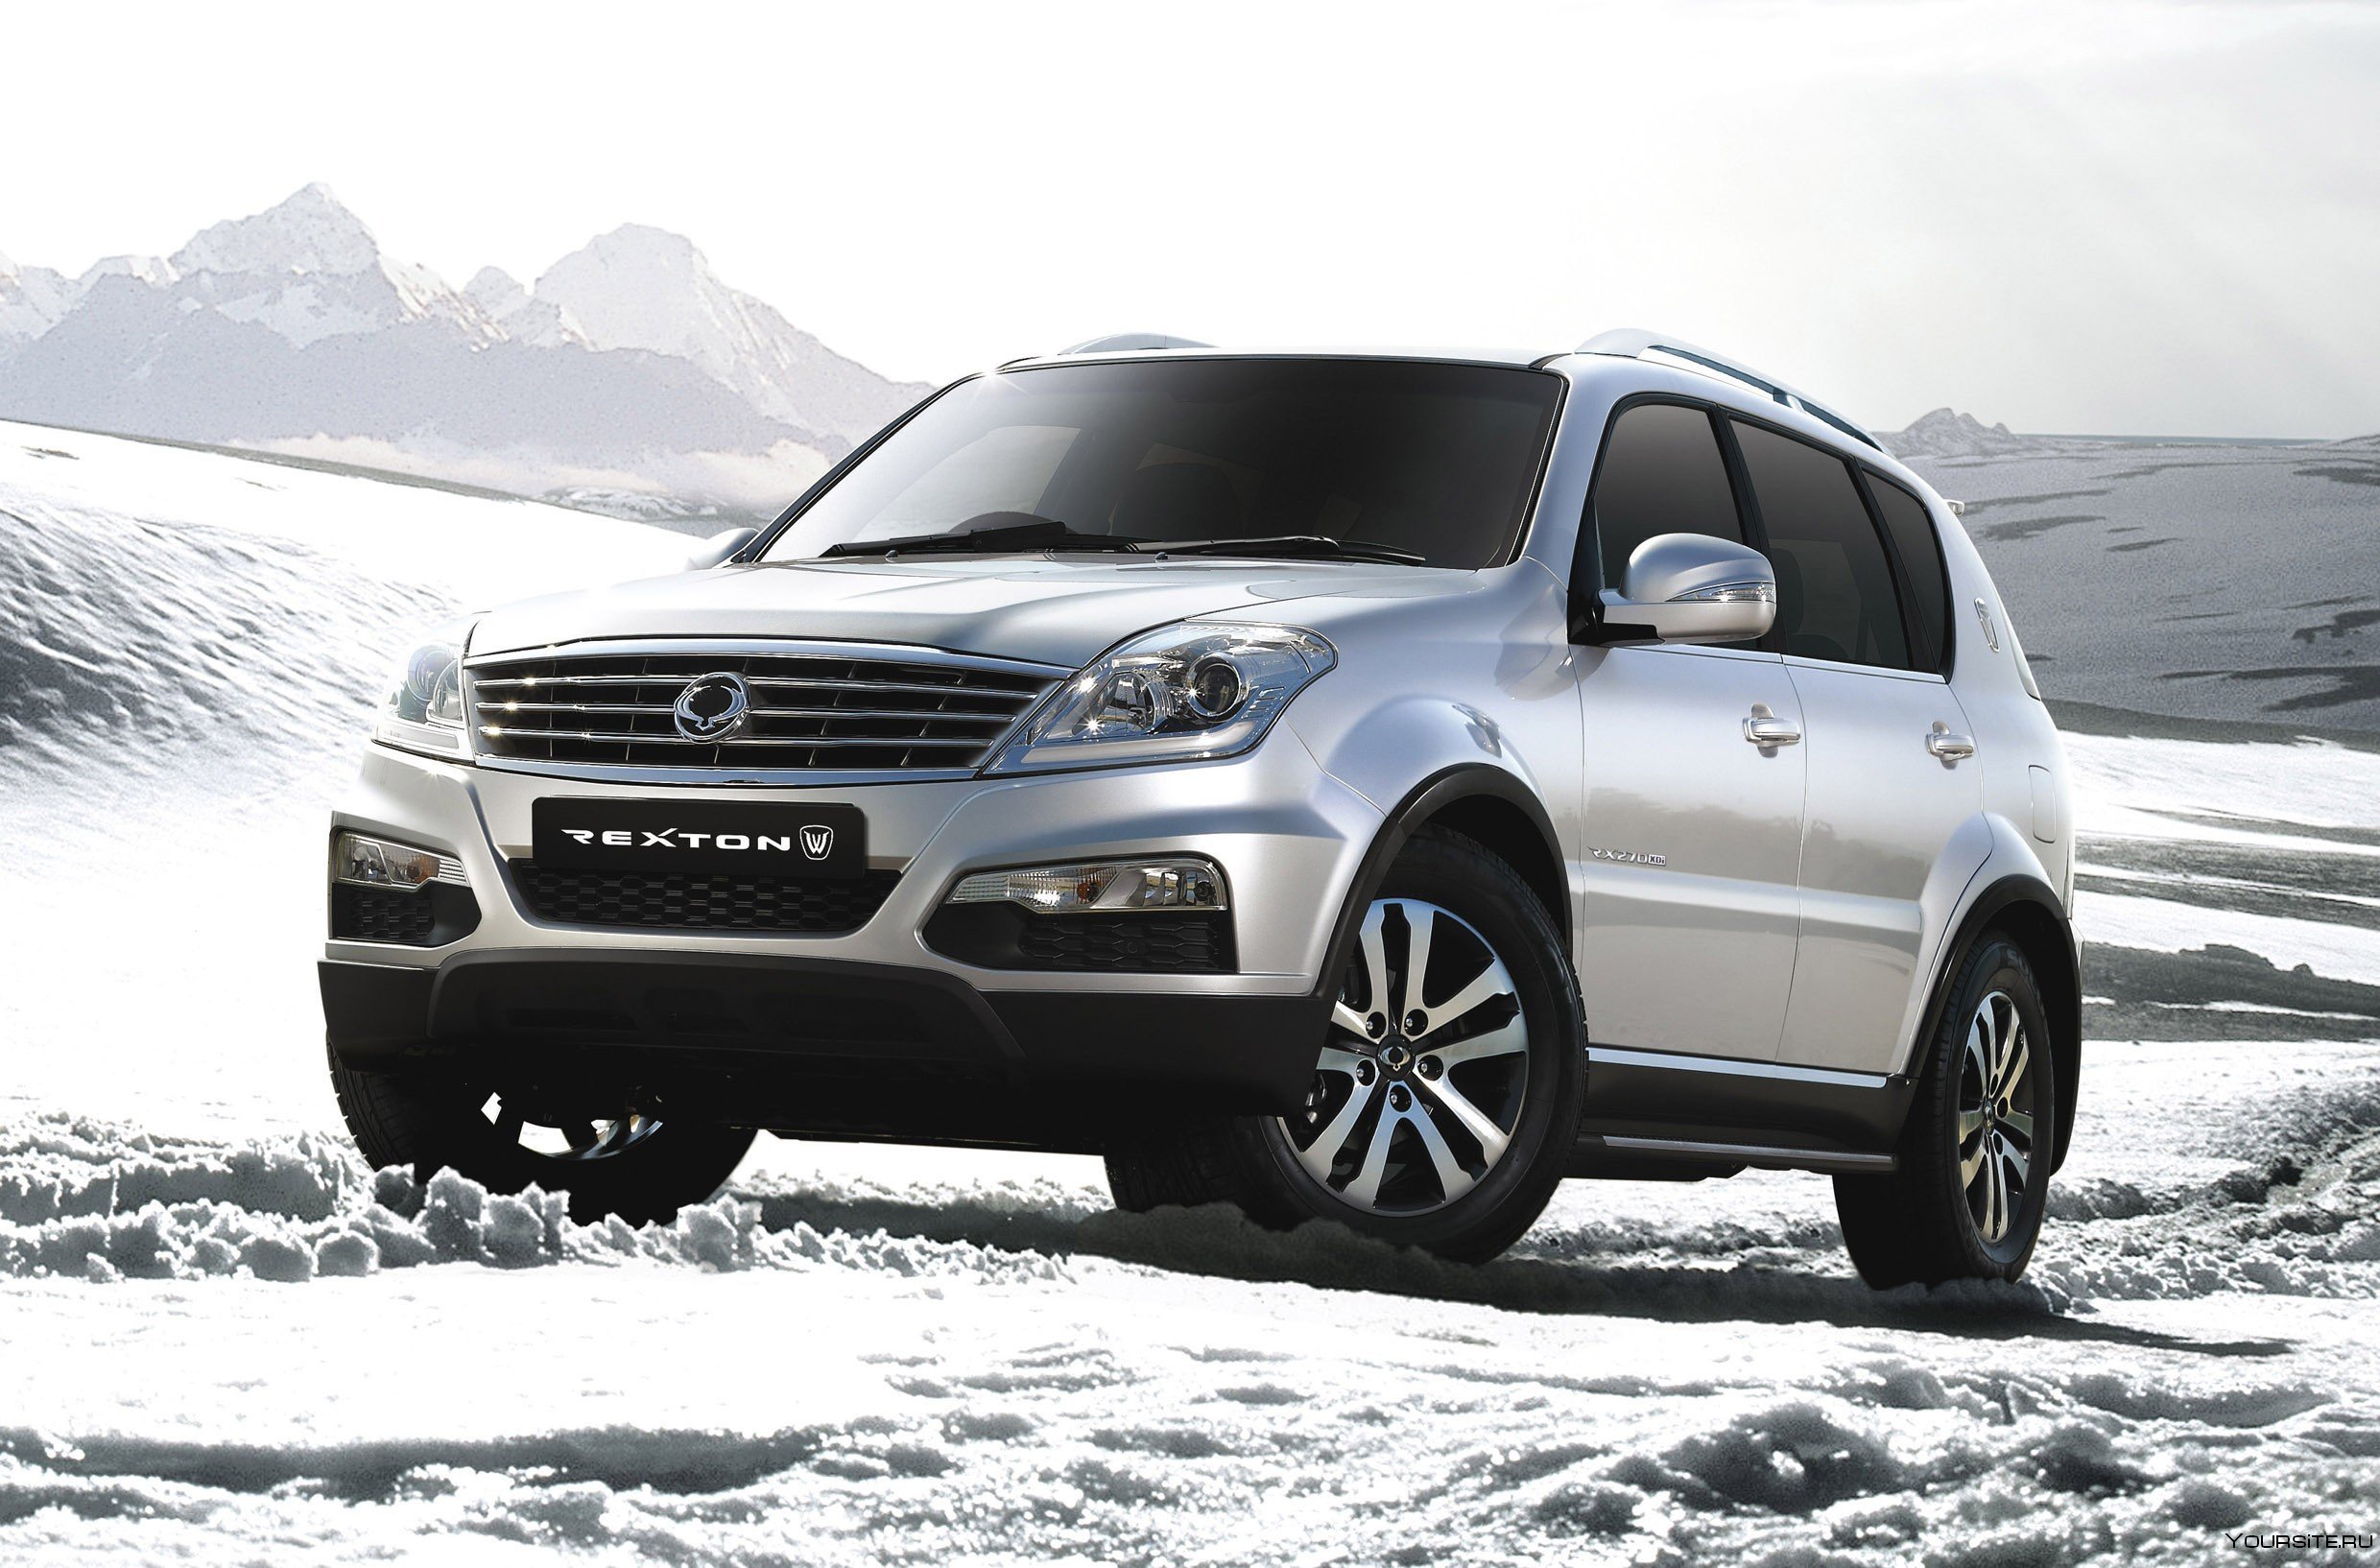 Санг енг рекстон 3. SSANGYONG Rexton. Санг Йонг Рекстон w. SSANGYONG Rexton 2014. Саньенг Рекстон 2012.